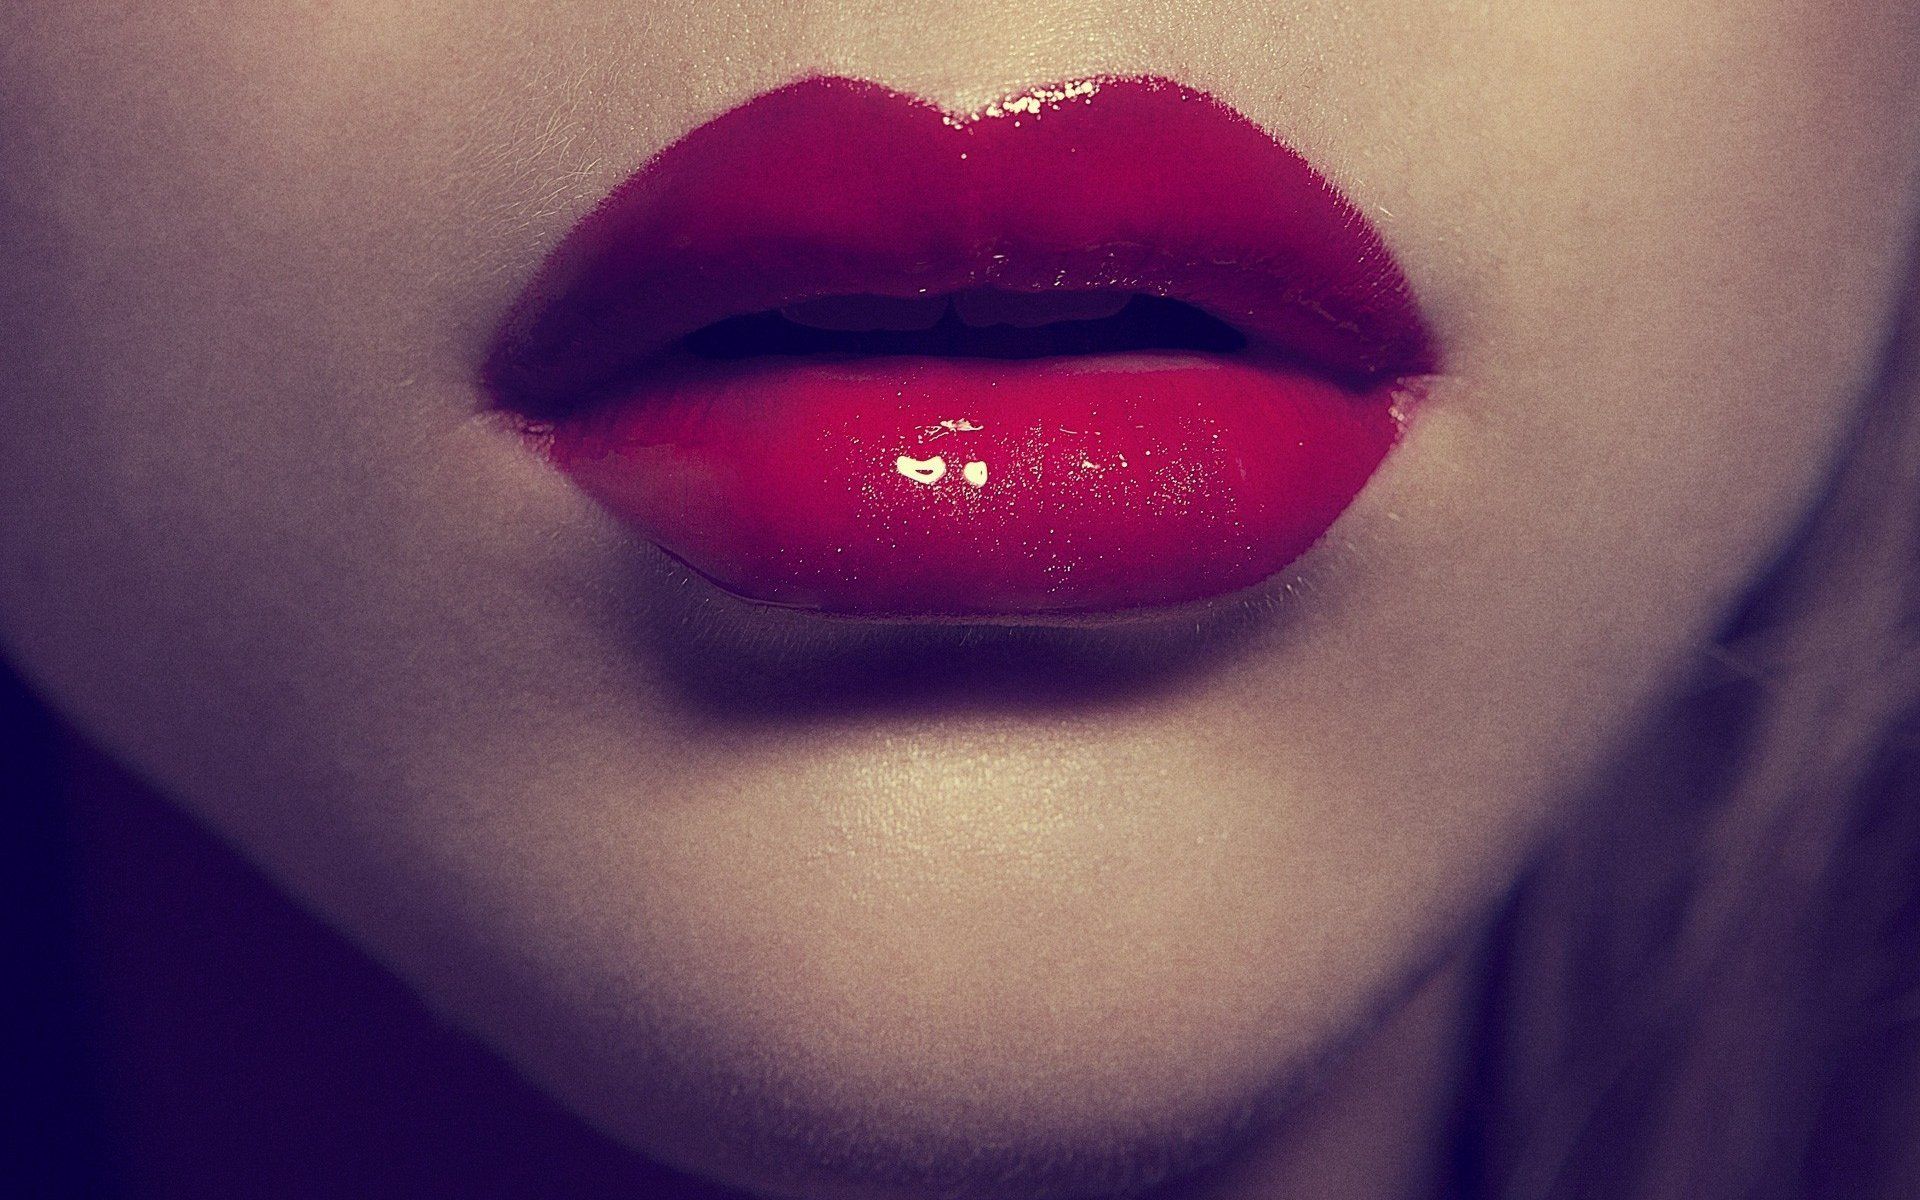 Red Lip Girl Wallpapers